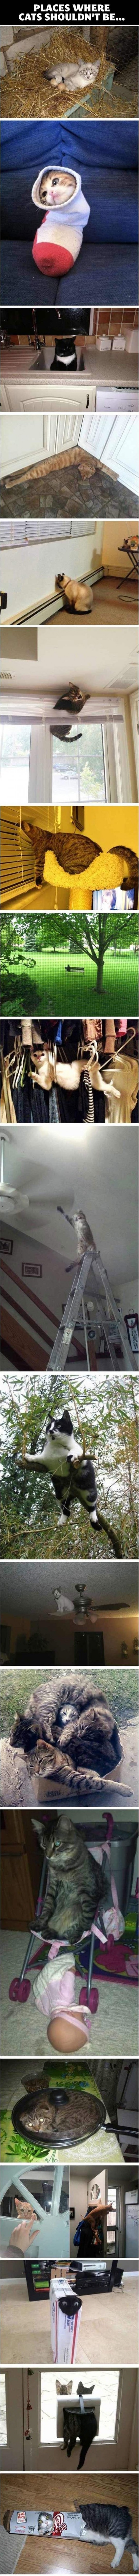 funny-pictures-cats-in-places-they-shoul